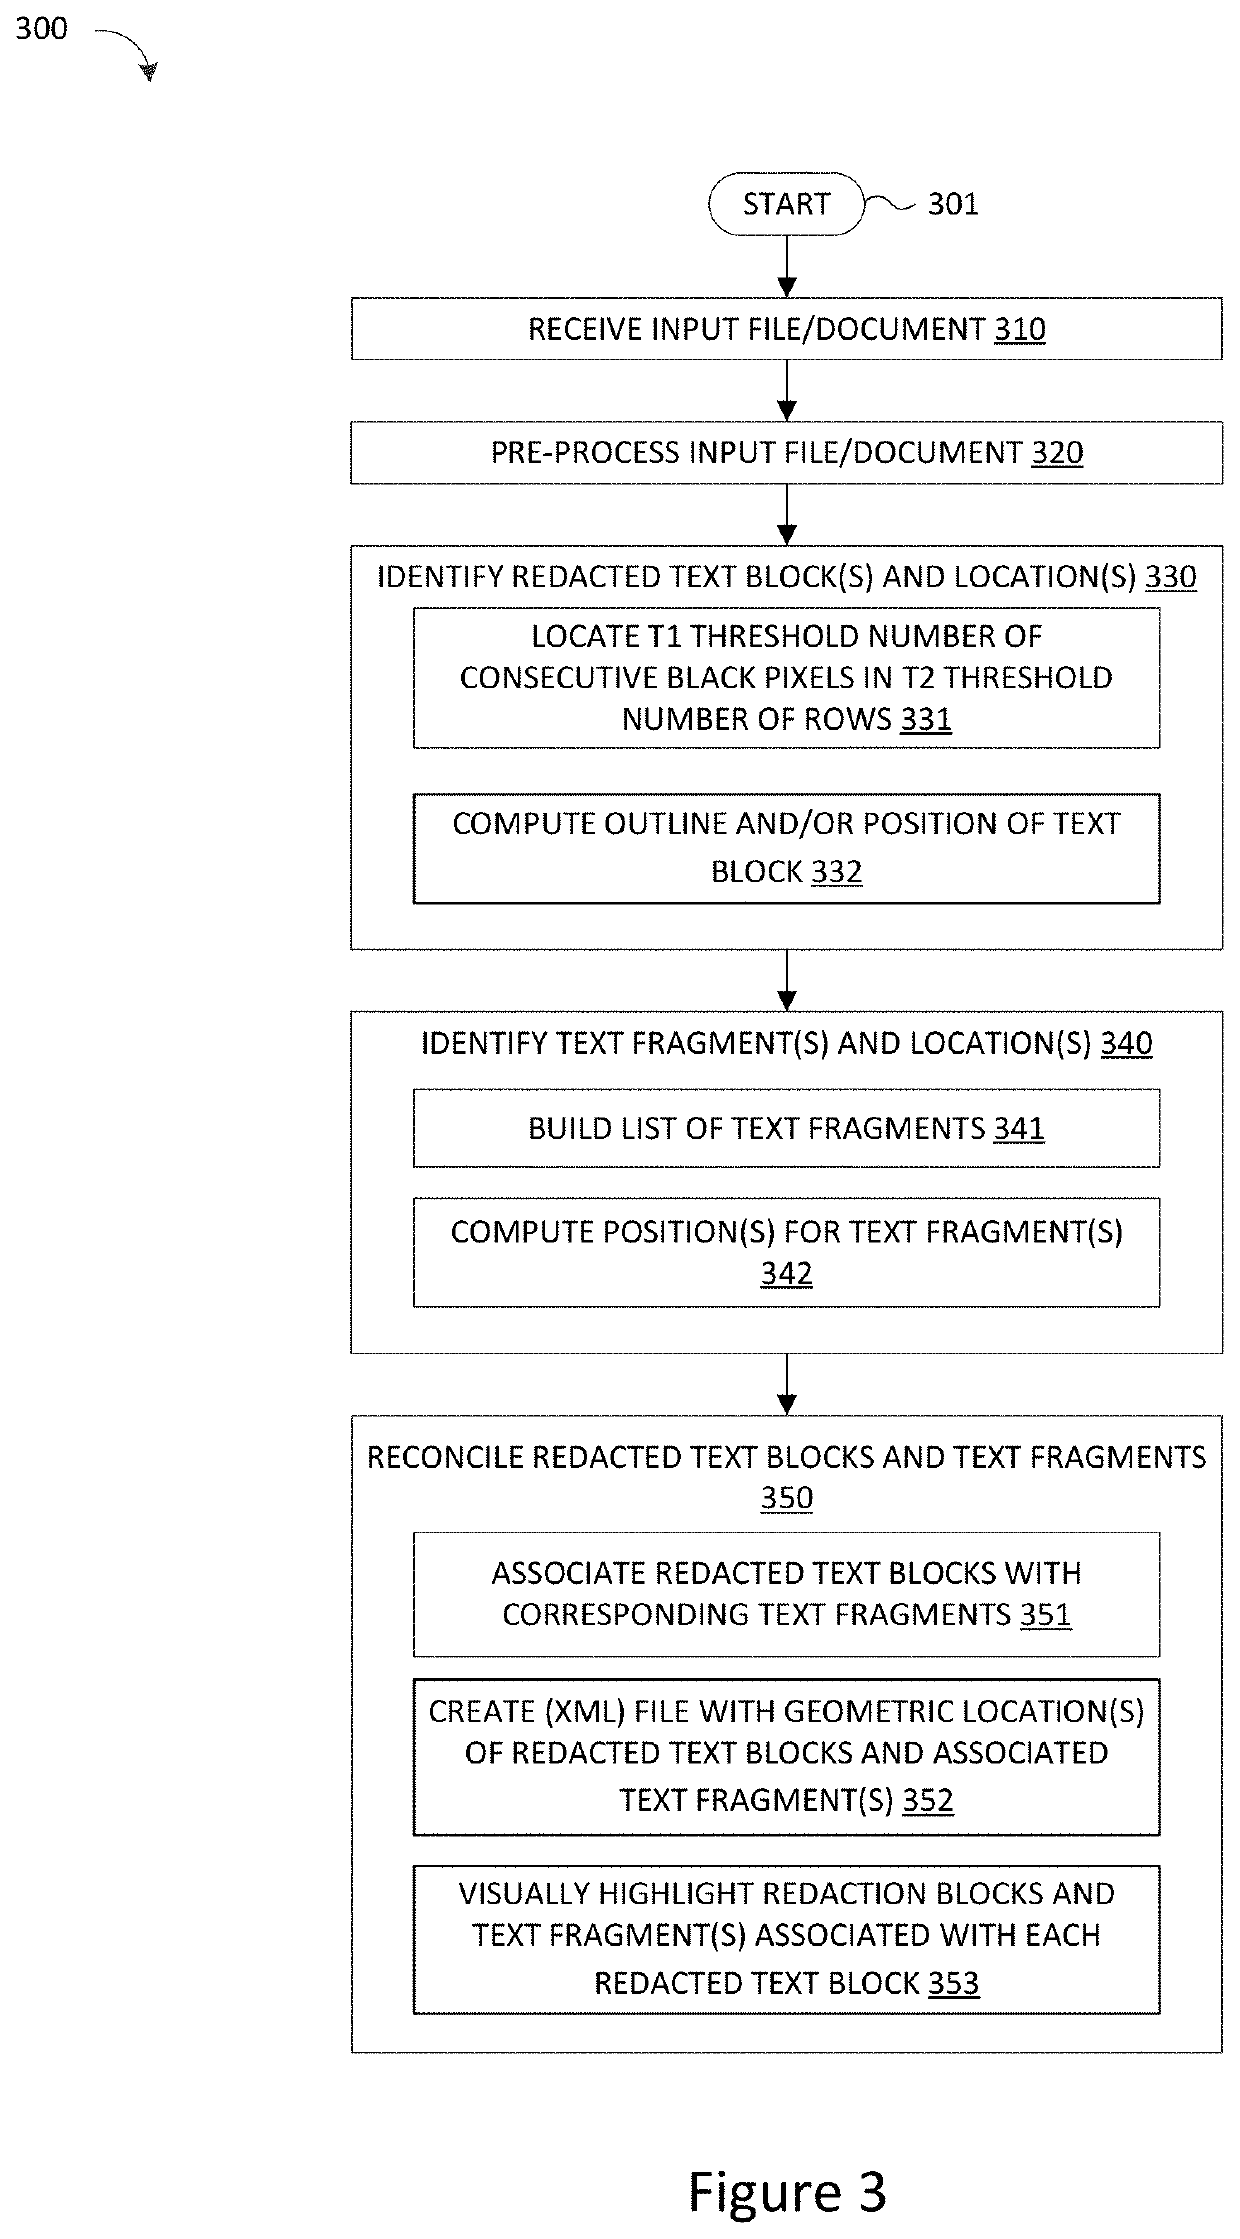 Method and System for Accurately Detecting, Extracting and Representing Redacted Text Blocks in a Document